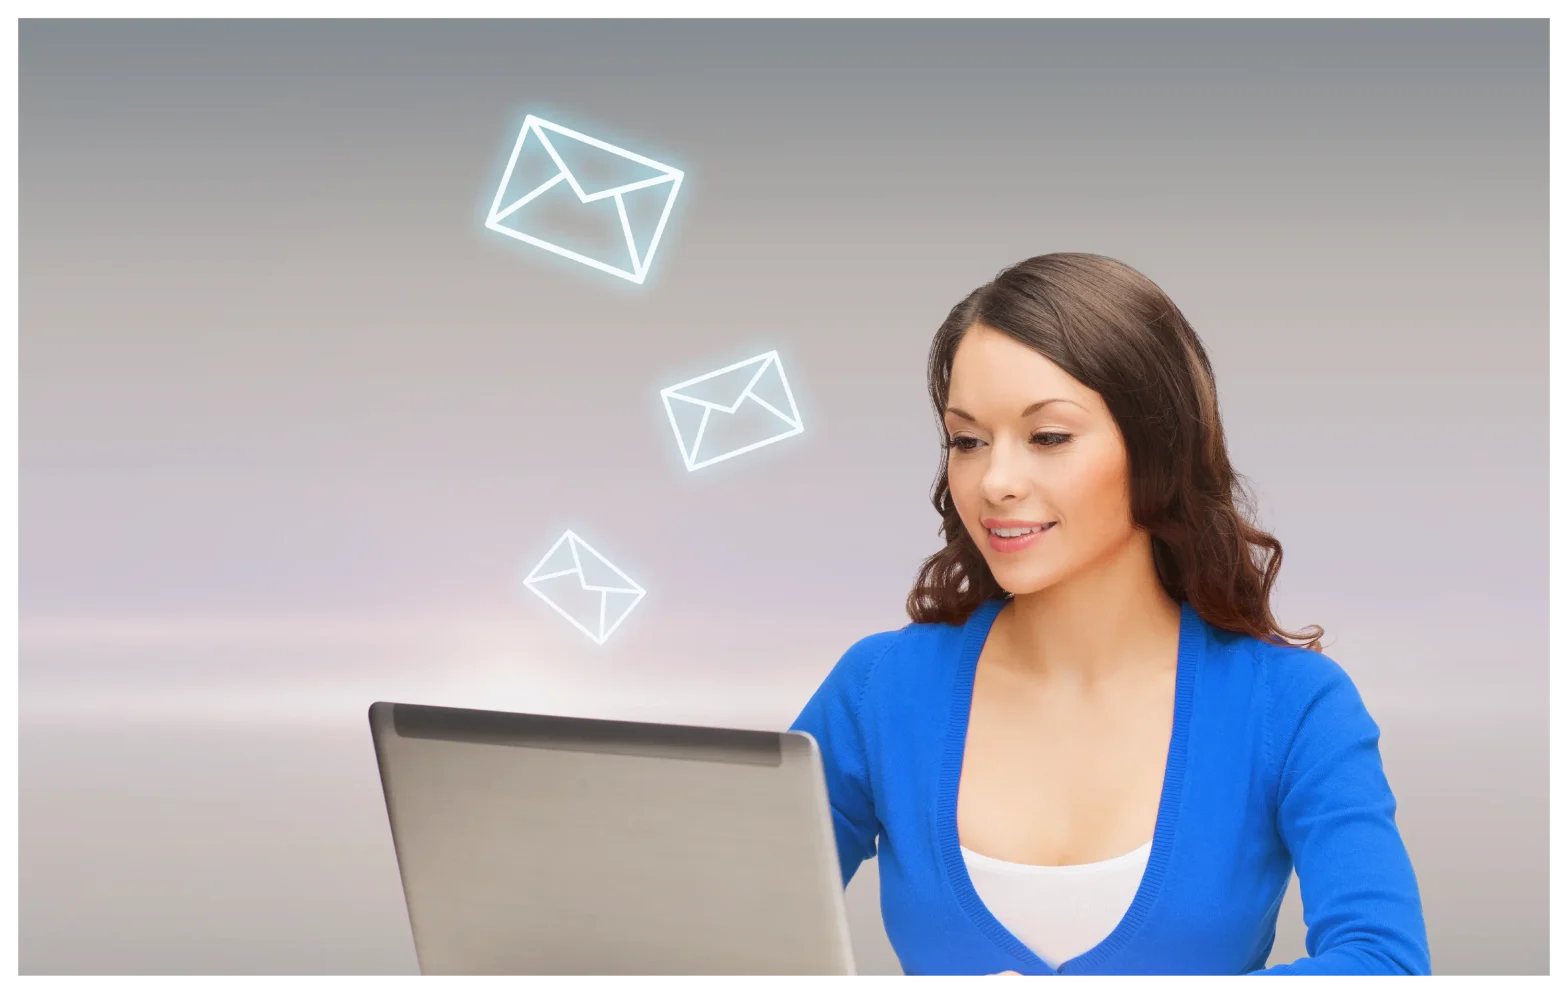 Email Marketing Benefits and Challenges for B2B Businesses - Expert Insights